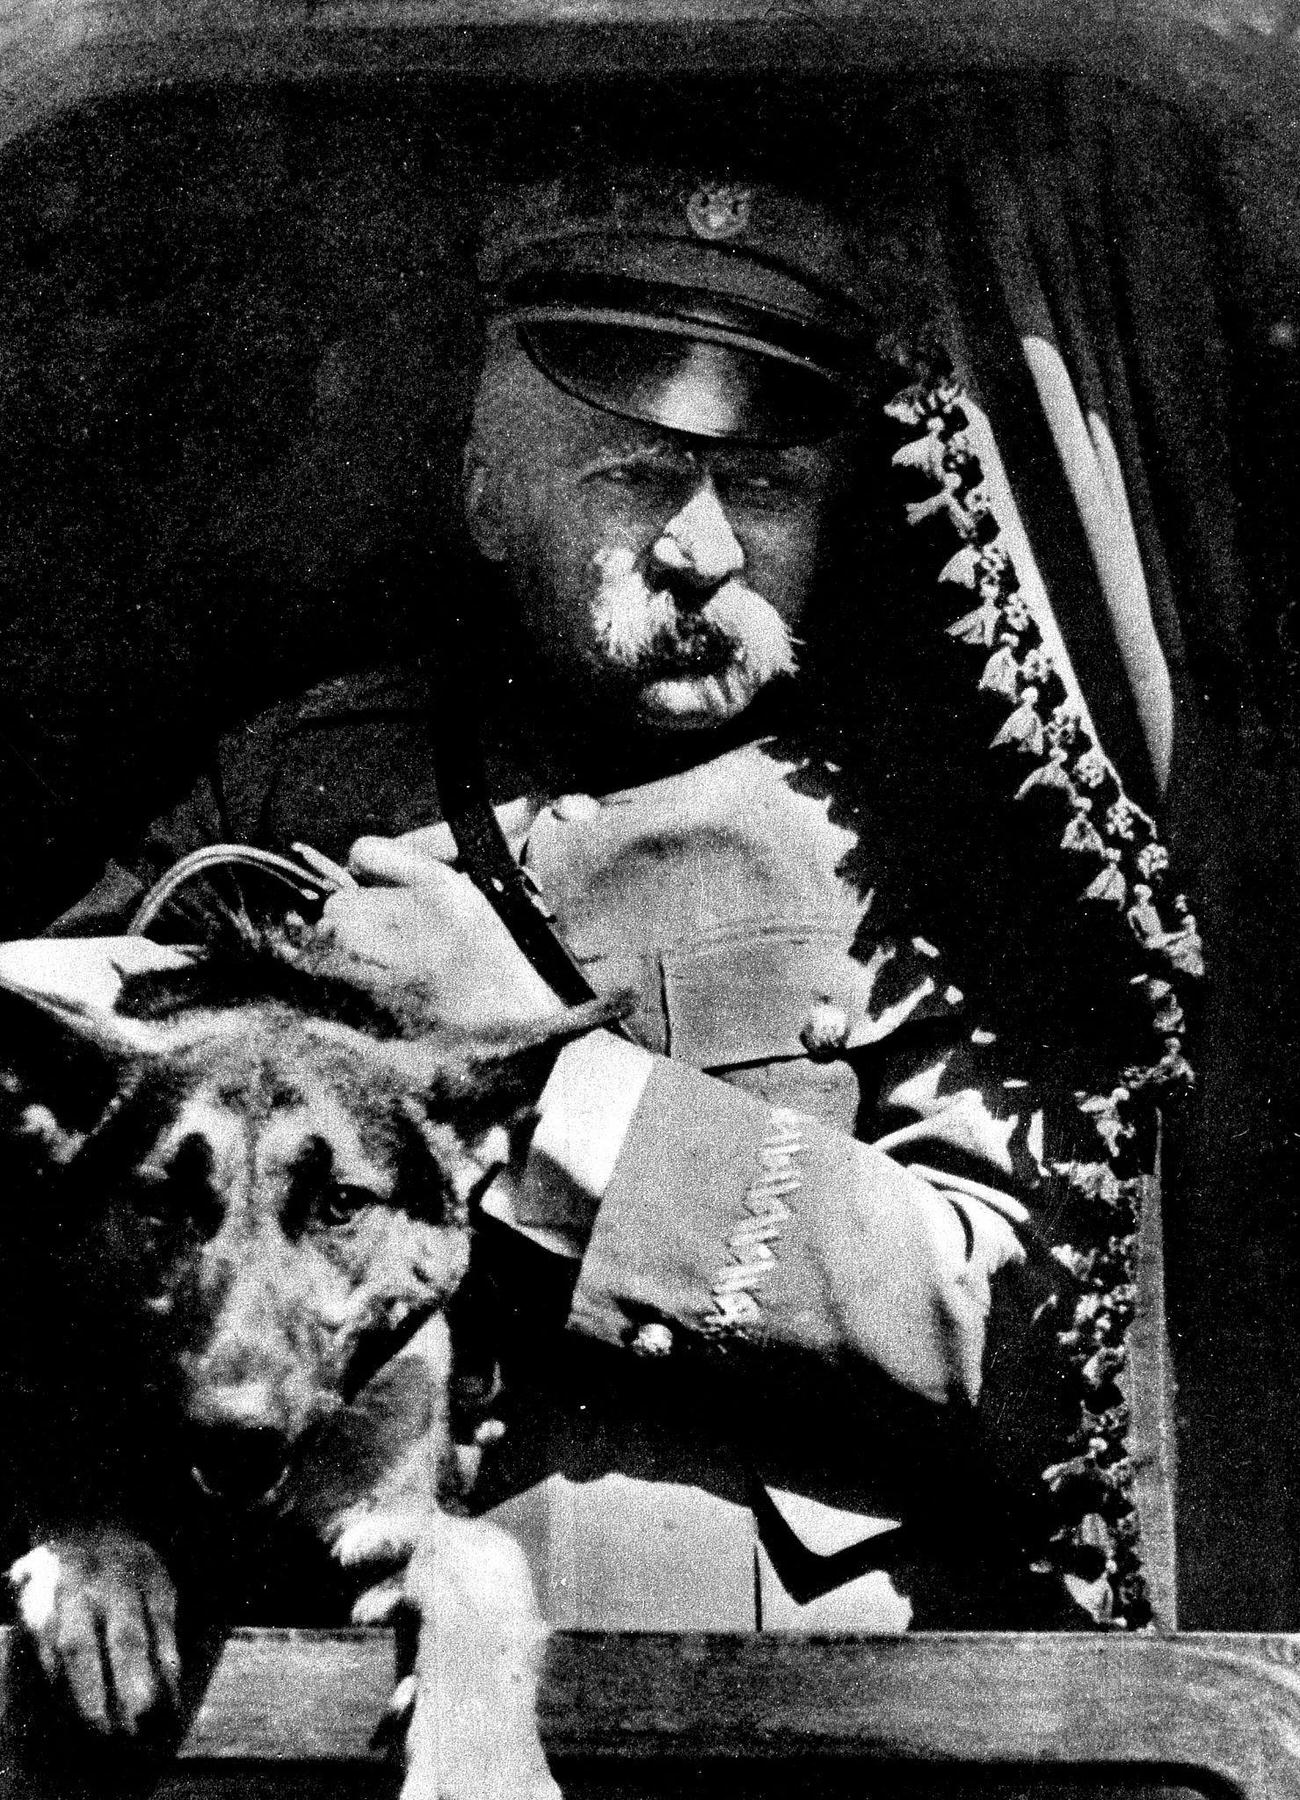 Jozef Pilsudski Jozef. Officer and politician, Poland Portrait in uniform, with his German shepherd dog in a train